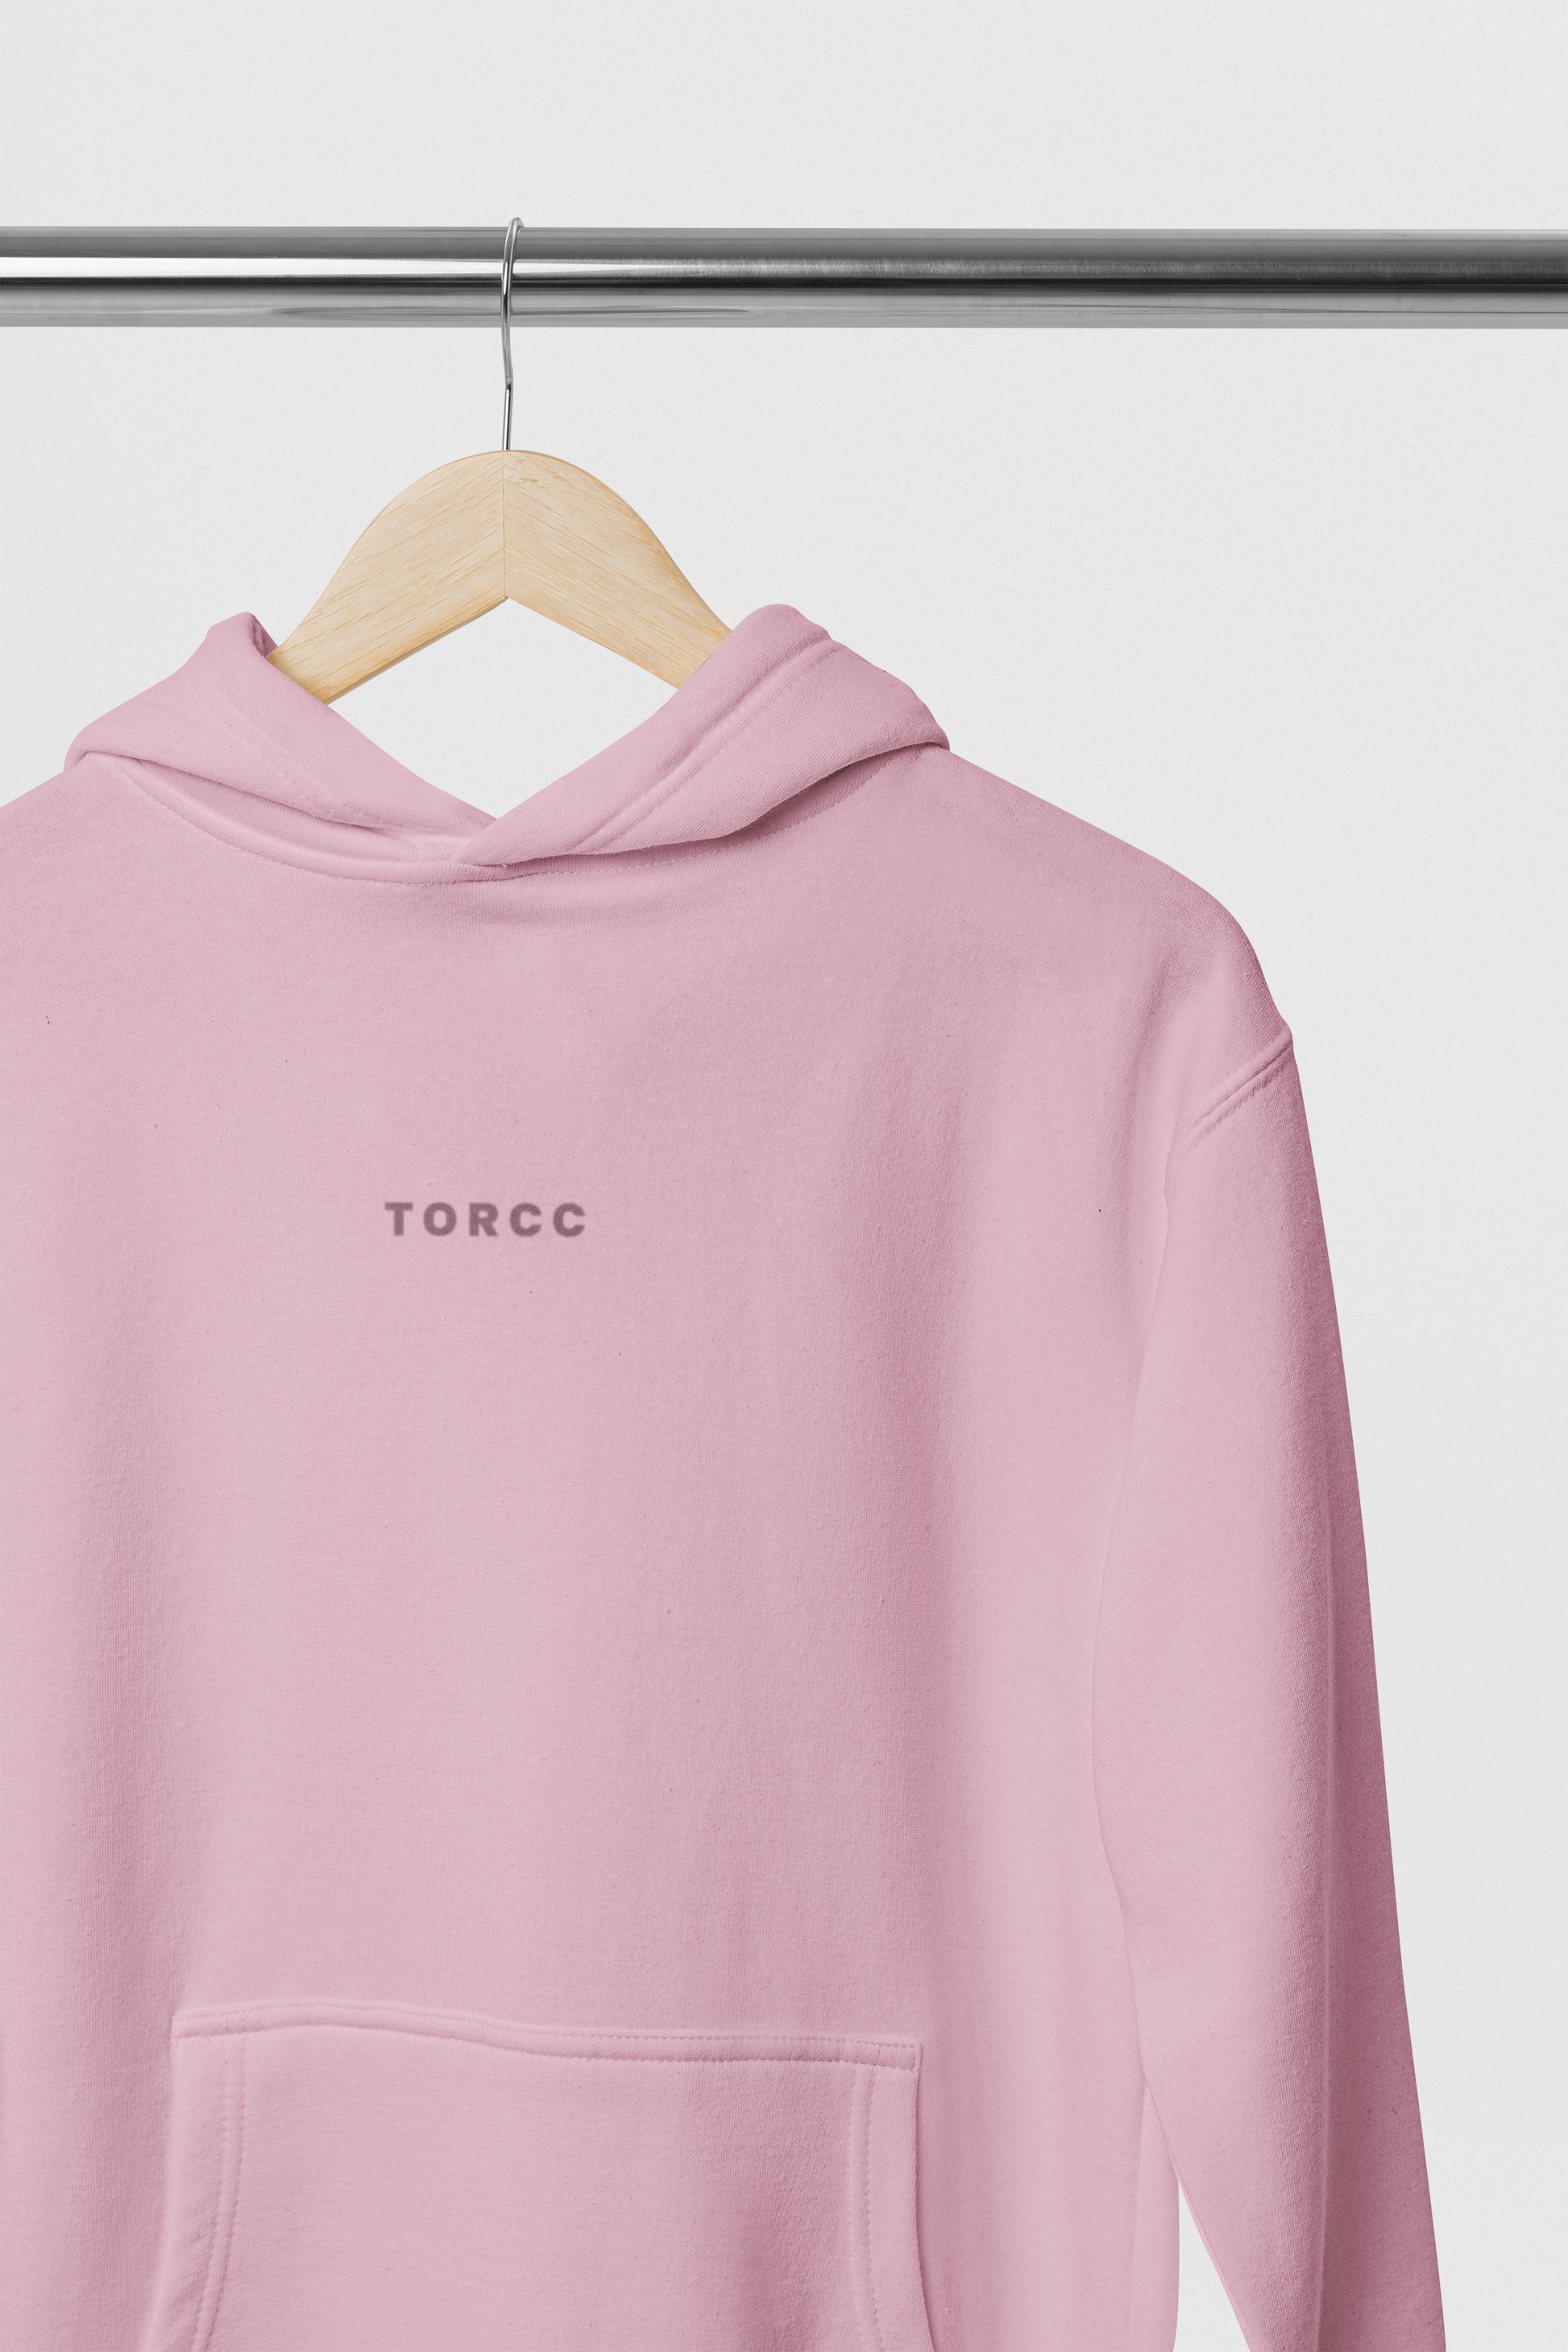 Peach Pink Blank Hoodie for Men and Womenoversized tshirt for men, oversized tshirt for women, graphic oversized tshirt, streetwear oversized tshirt, oversized tshirt, oversized tee, hoodie for men, hoodie for women, hoodie men, hoodies on sale